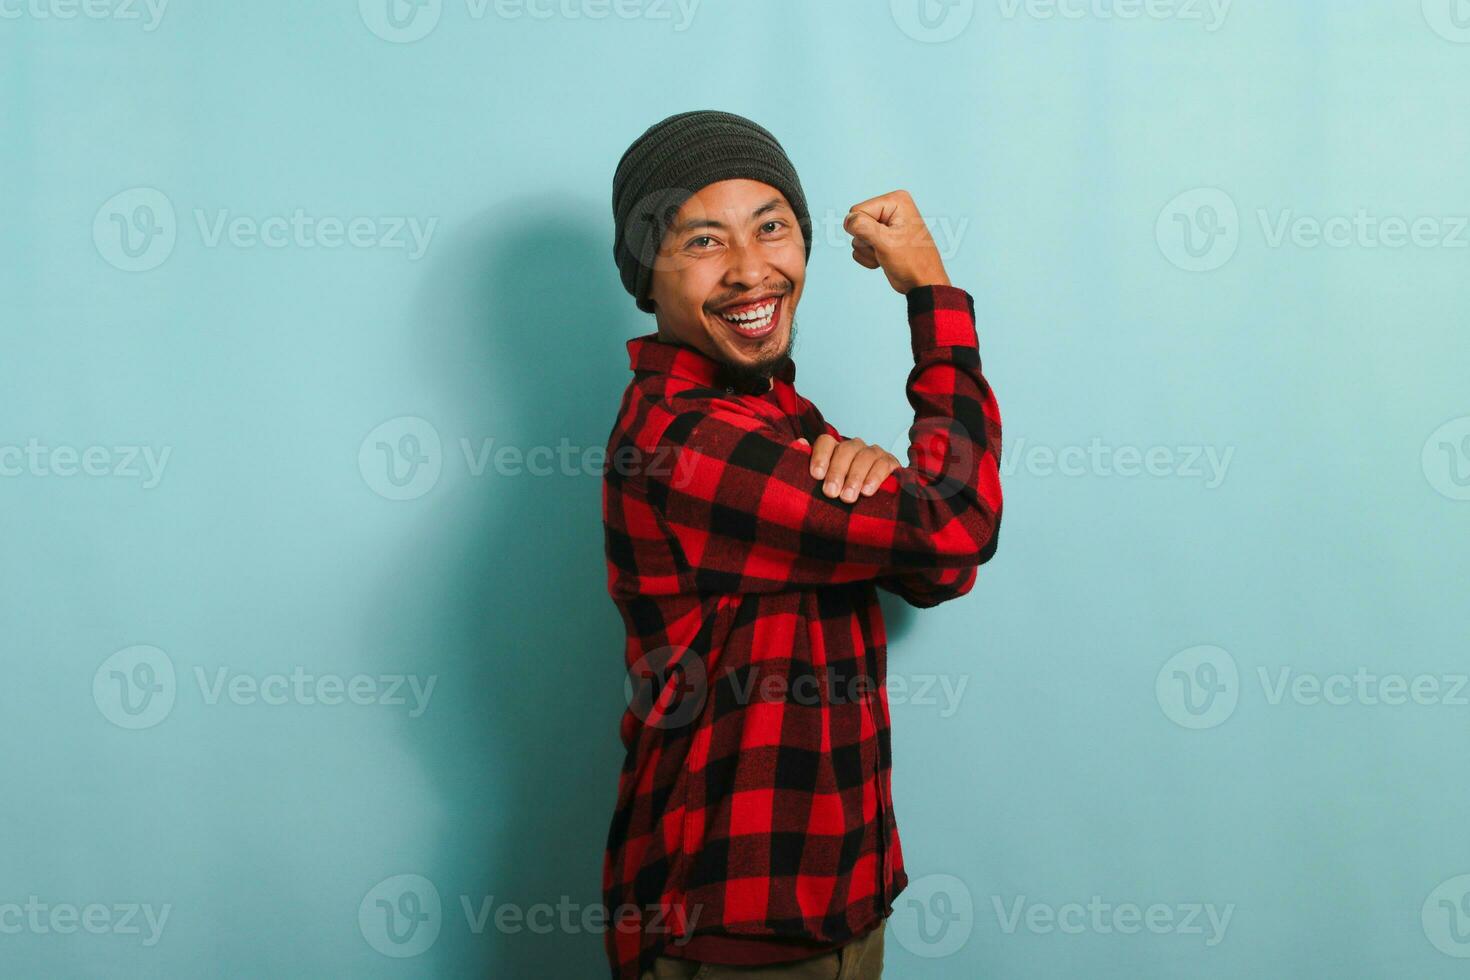 Excited Young Asian man with beanie hat and red plaid flannel shirt making a strong gesture, showing strength by flexing his arms and muscles, isolated on a blue background photo